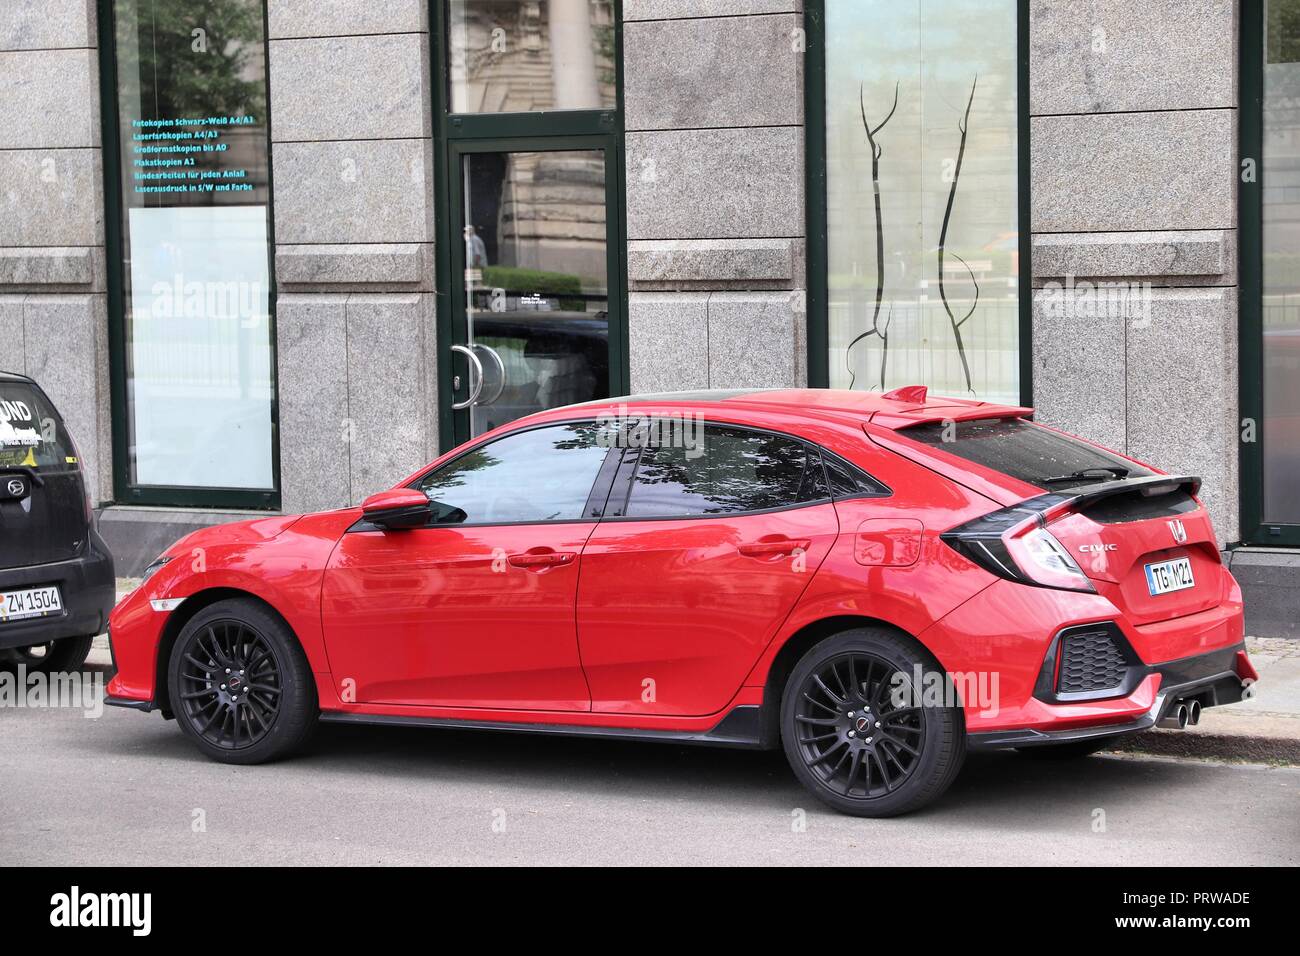 LEIPZIG, GERMANY - MAY 9, 2018: Red Honda Civic compact car in Germany. There were 45.8 million cars registered in Germany (as of 2017). Stock Photo